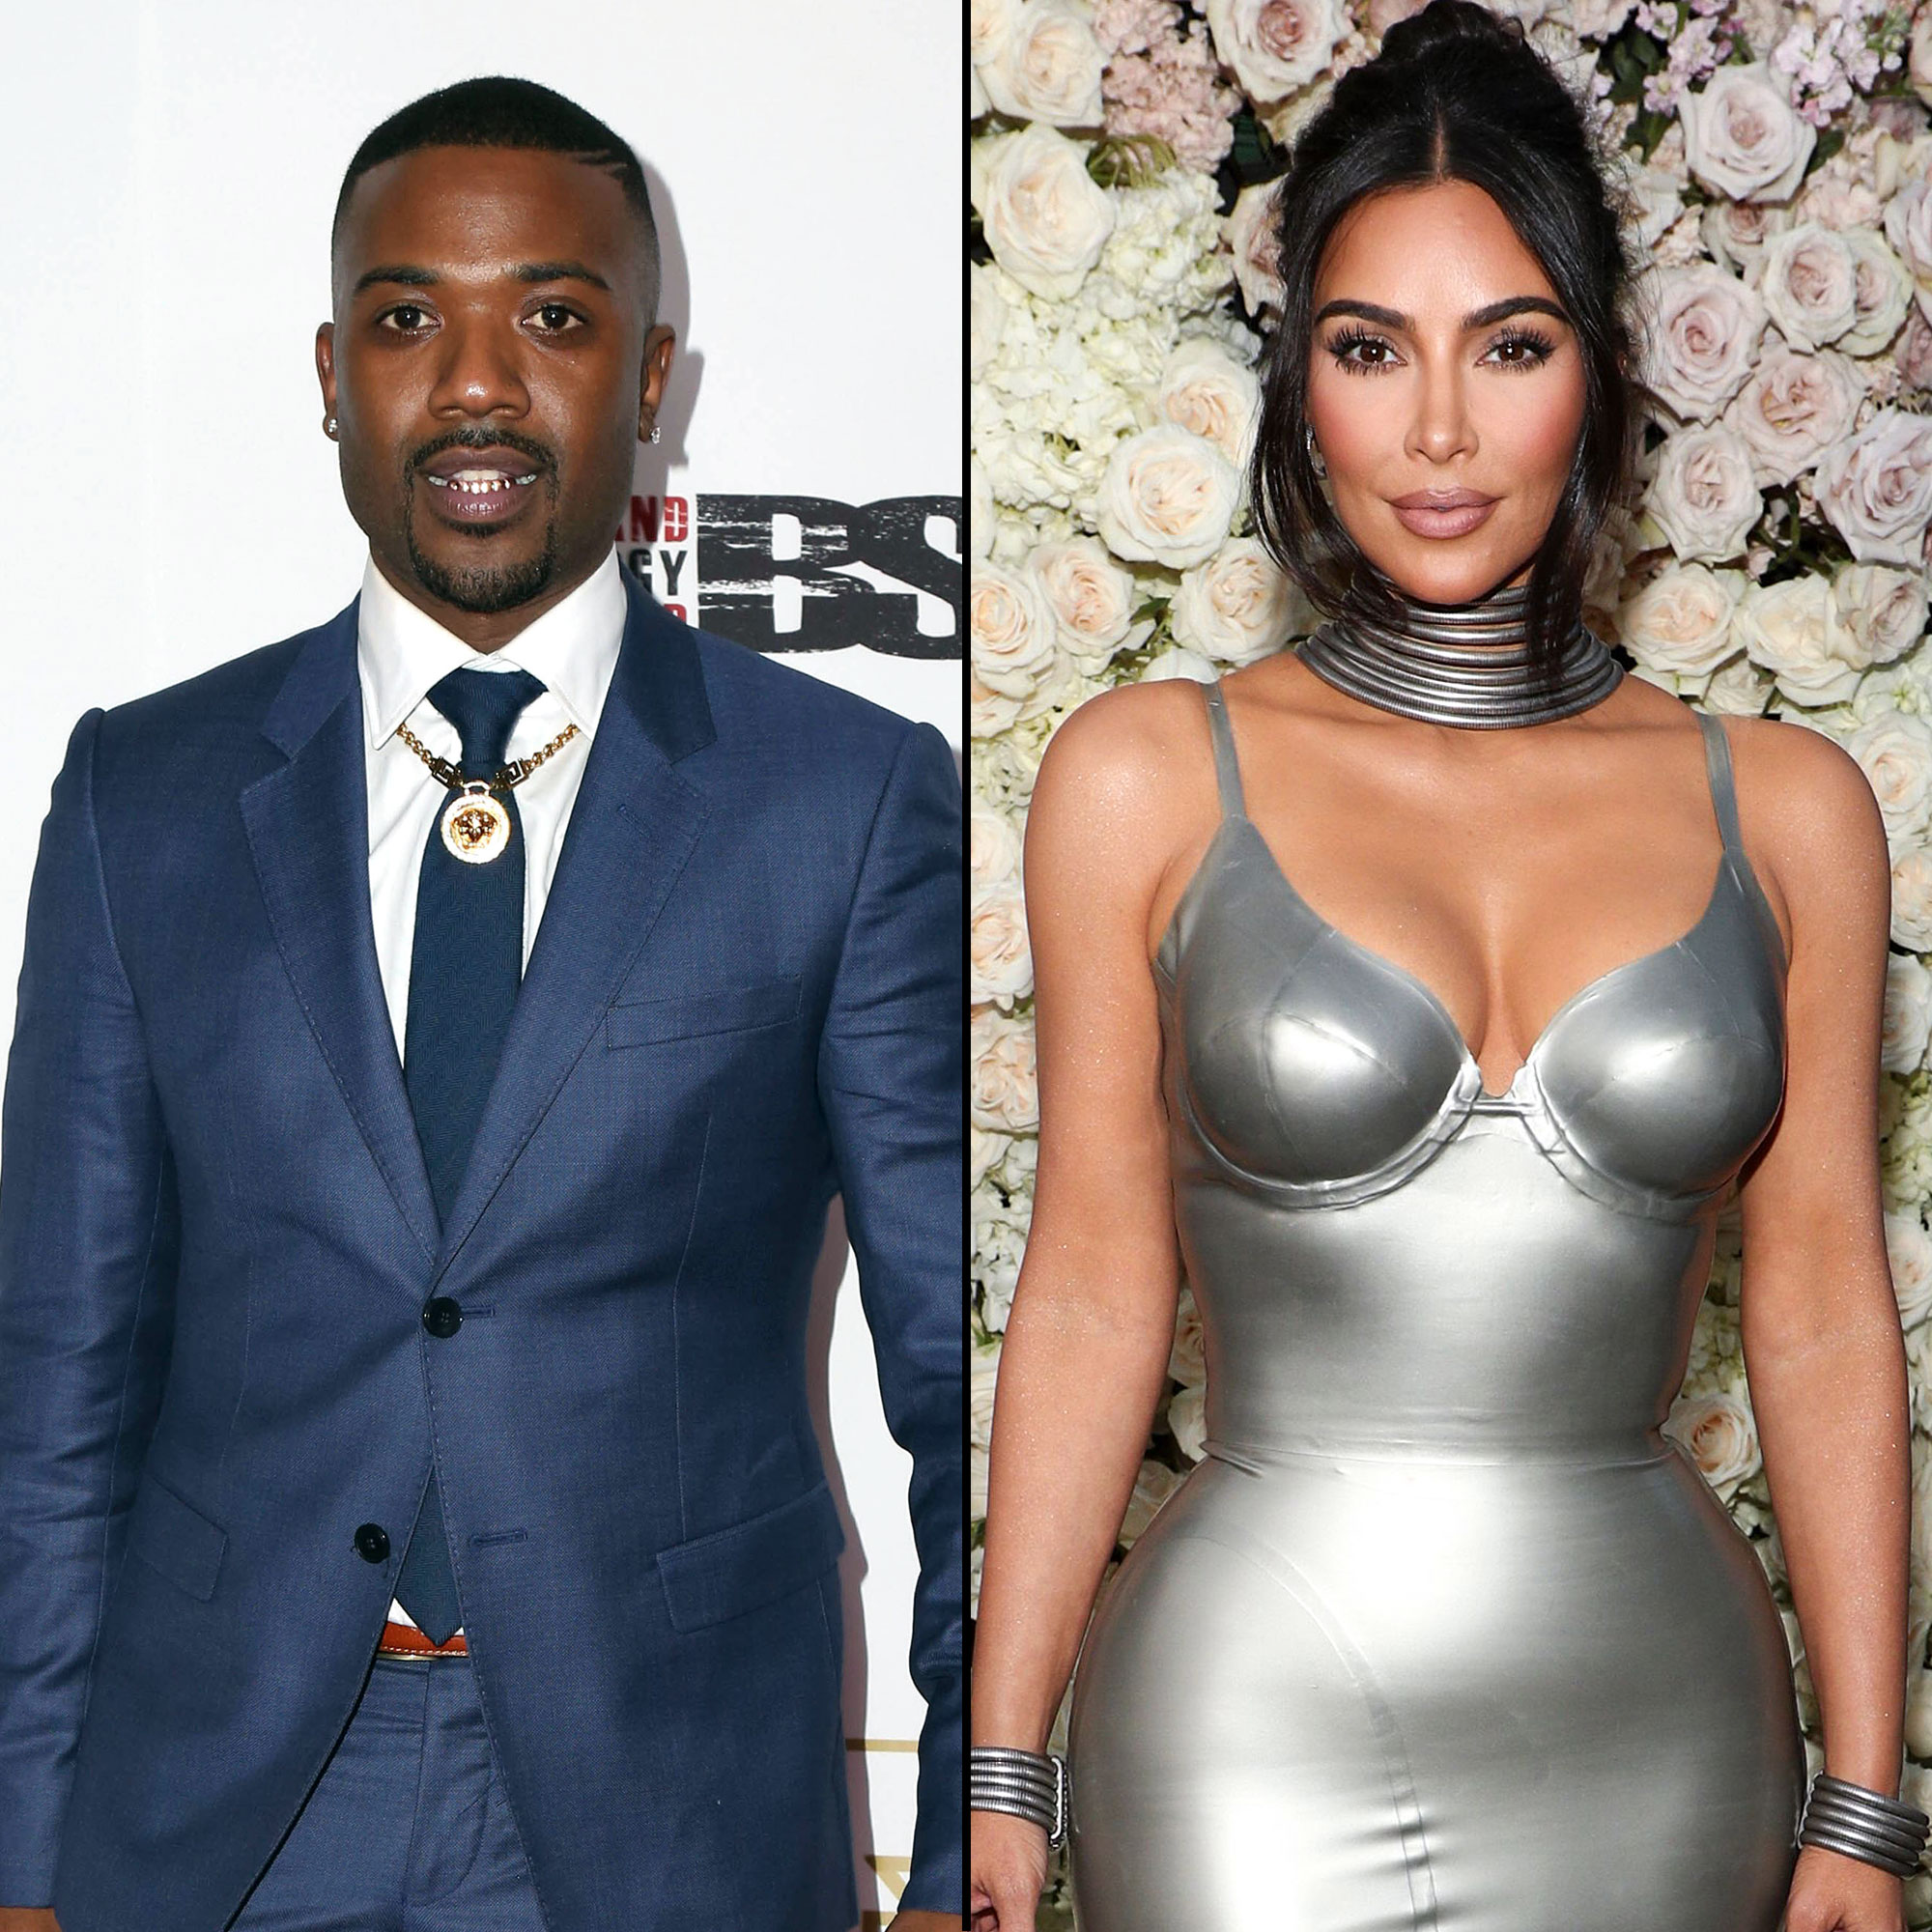 Ray J Shares Kim Kardashian's Alleged DMs About Sex Tape Release